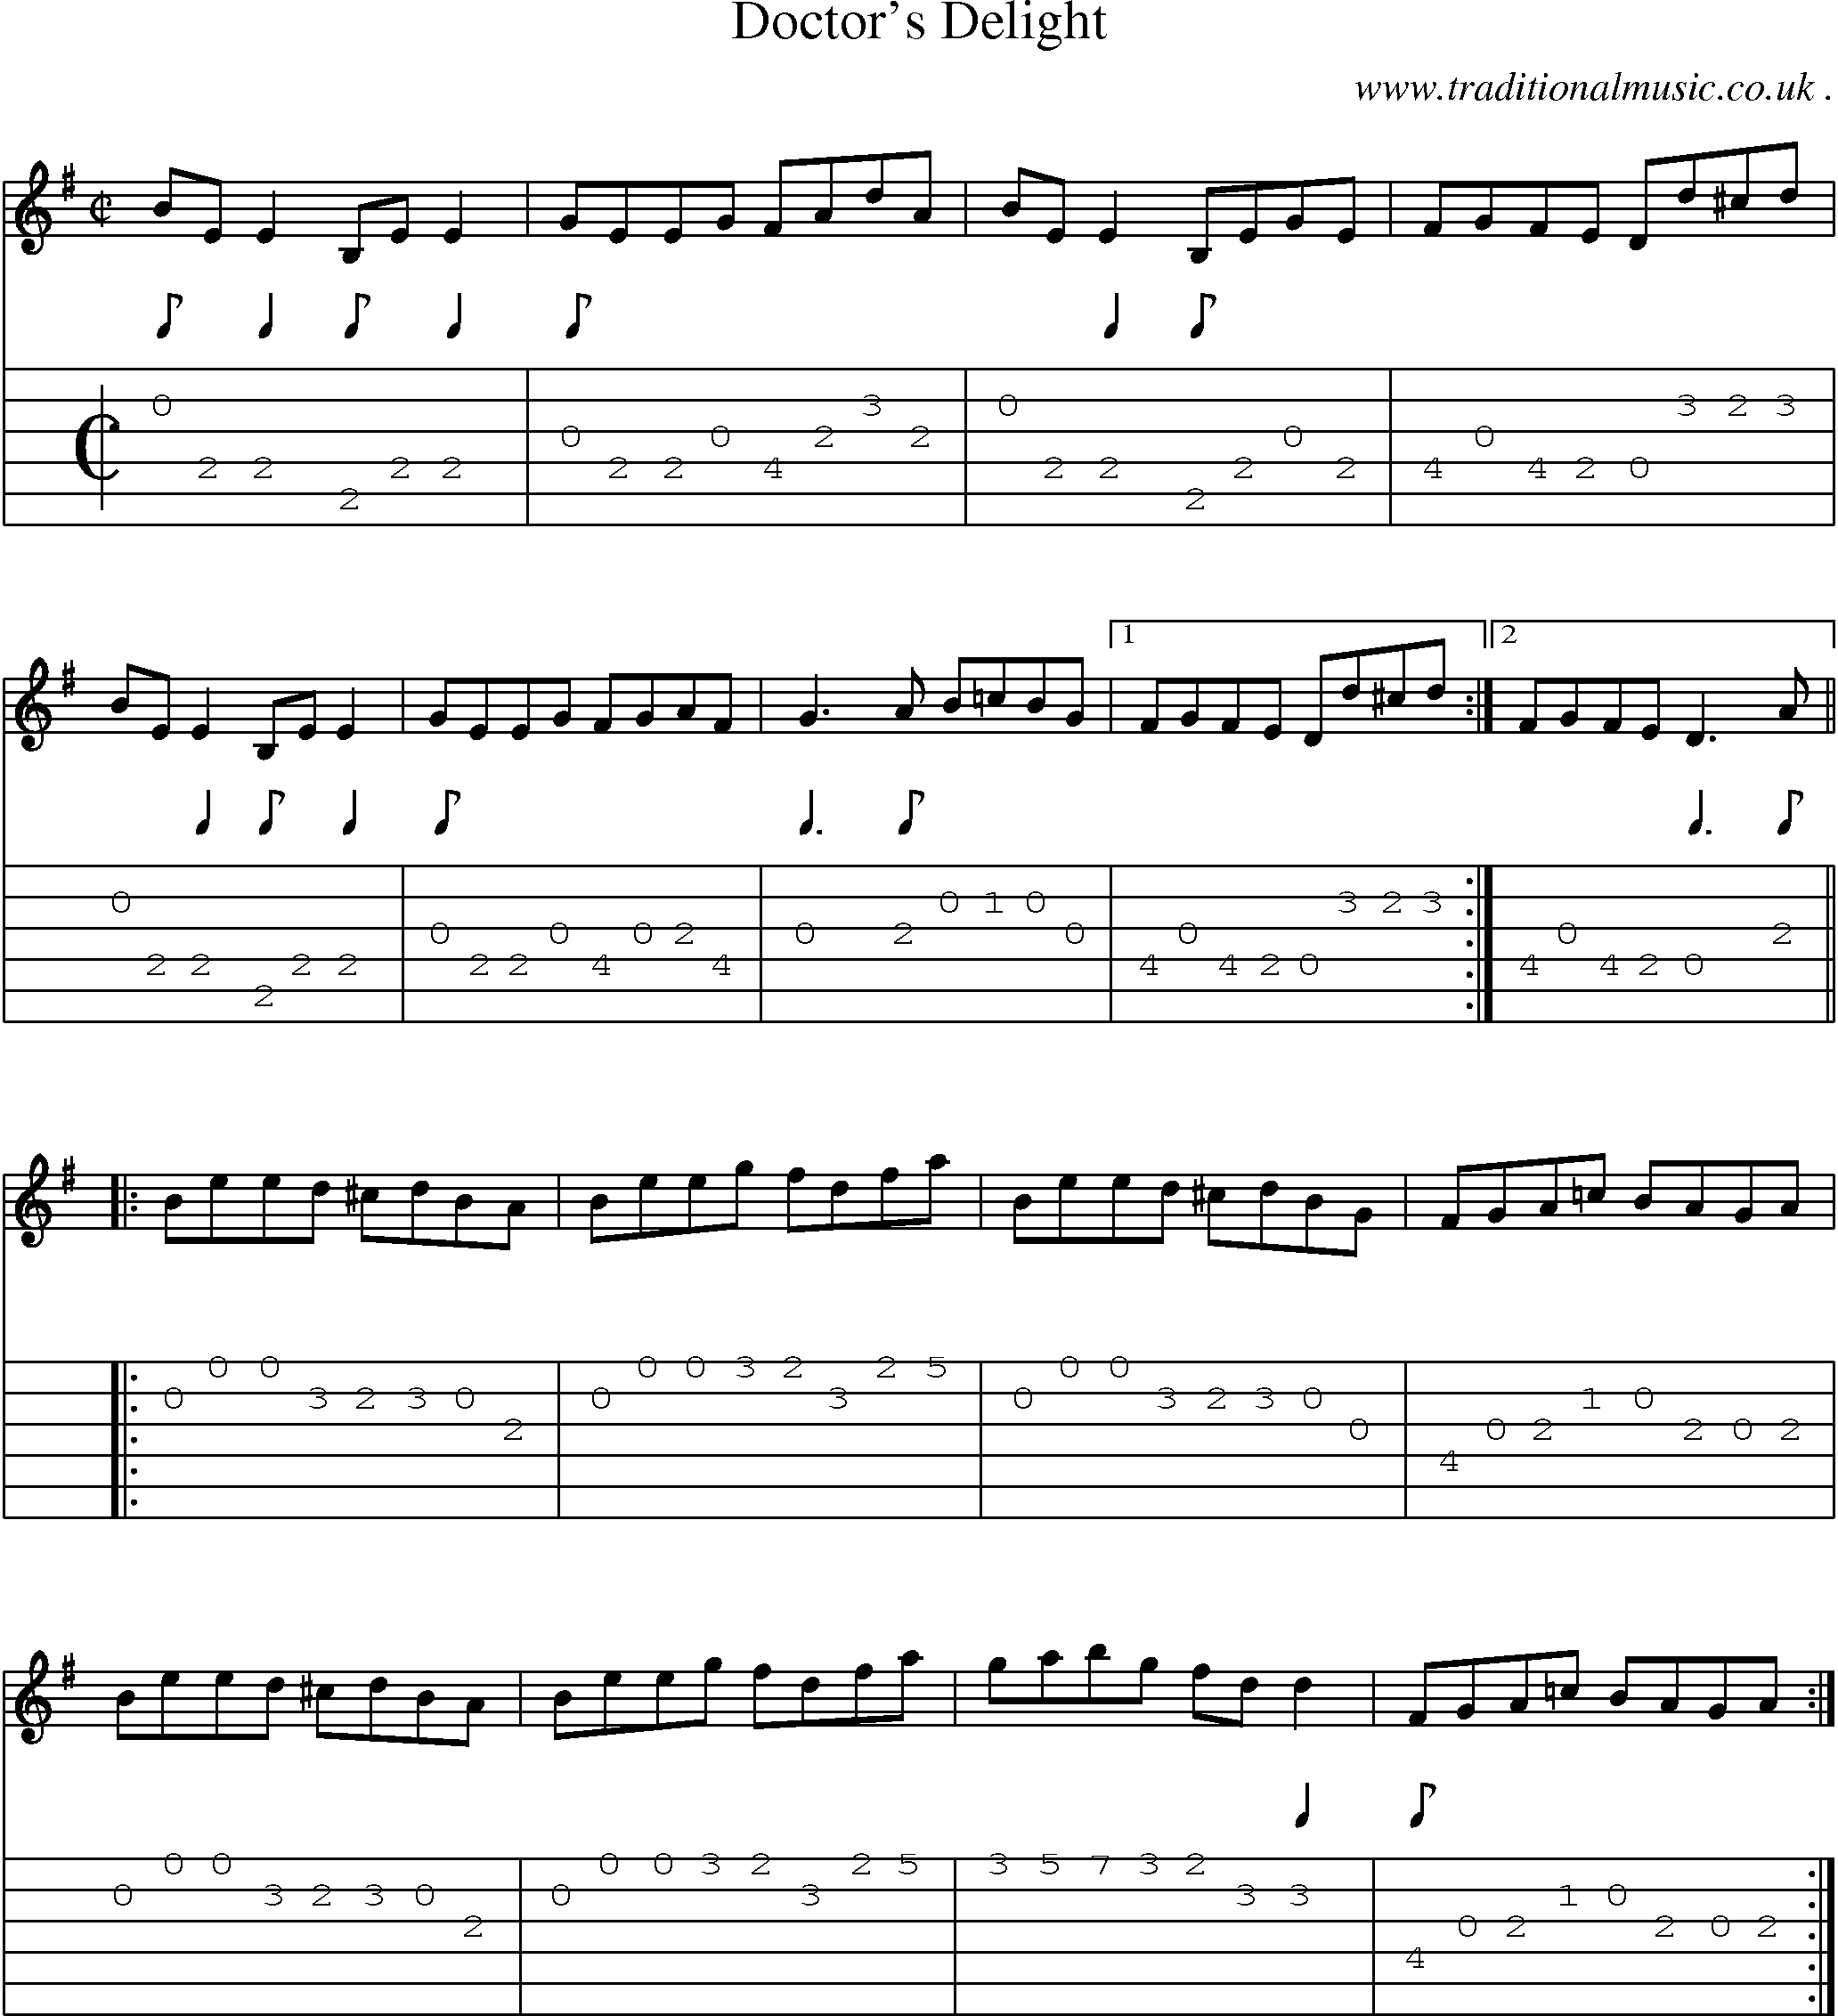 Sheet-Music and Guitar Tabs for Doctors Delight